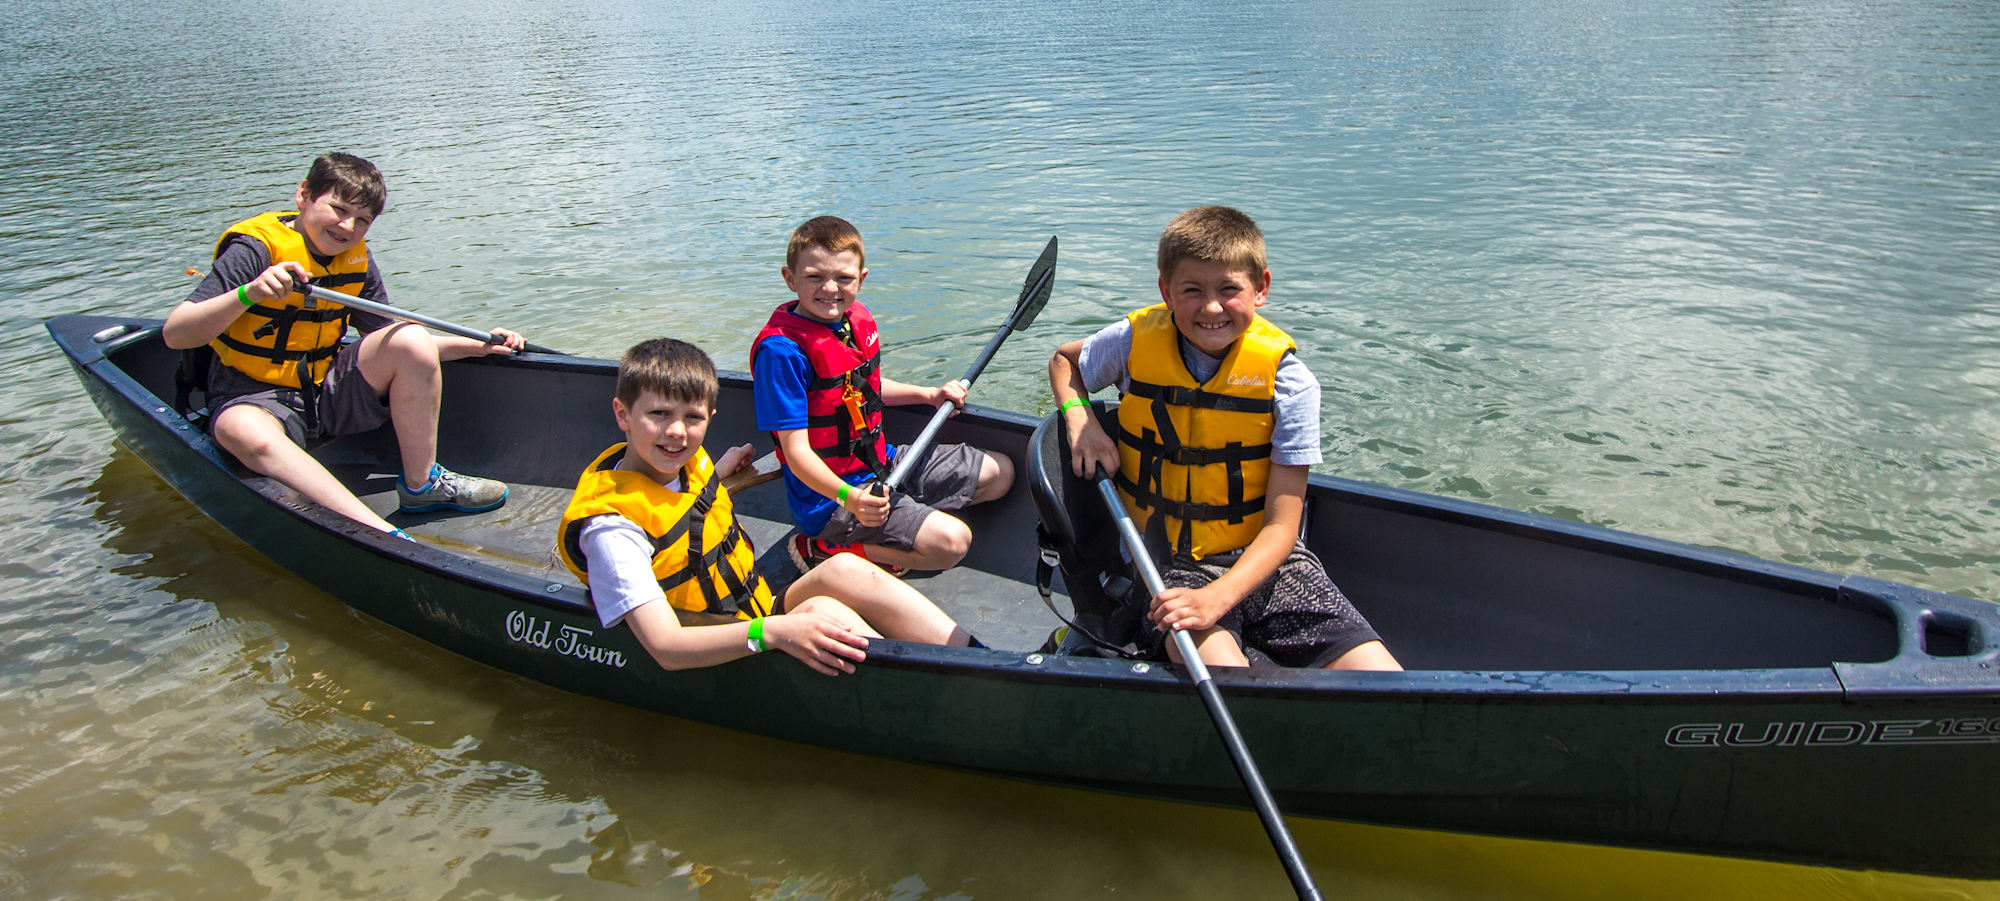 A group of boys canoeing